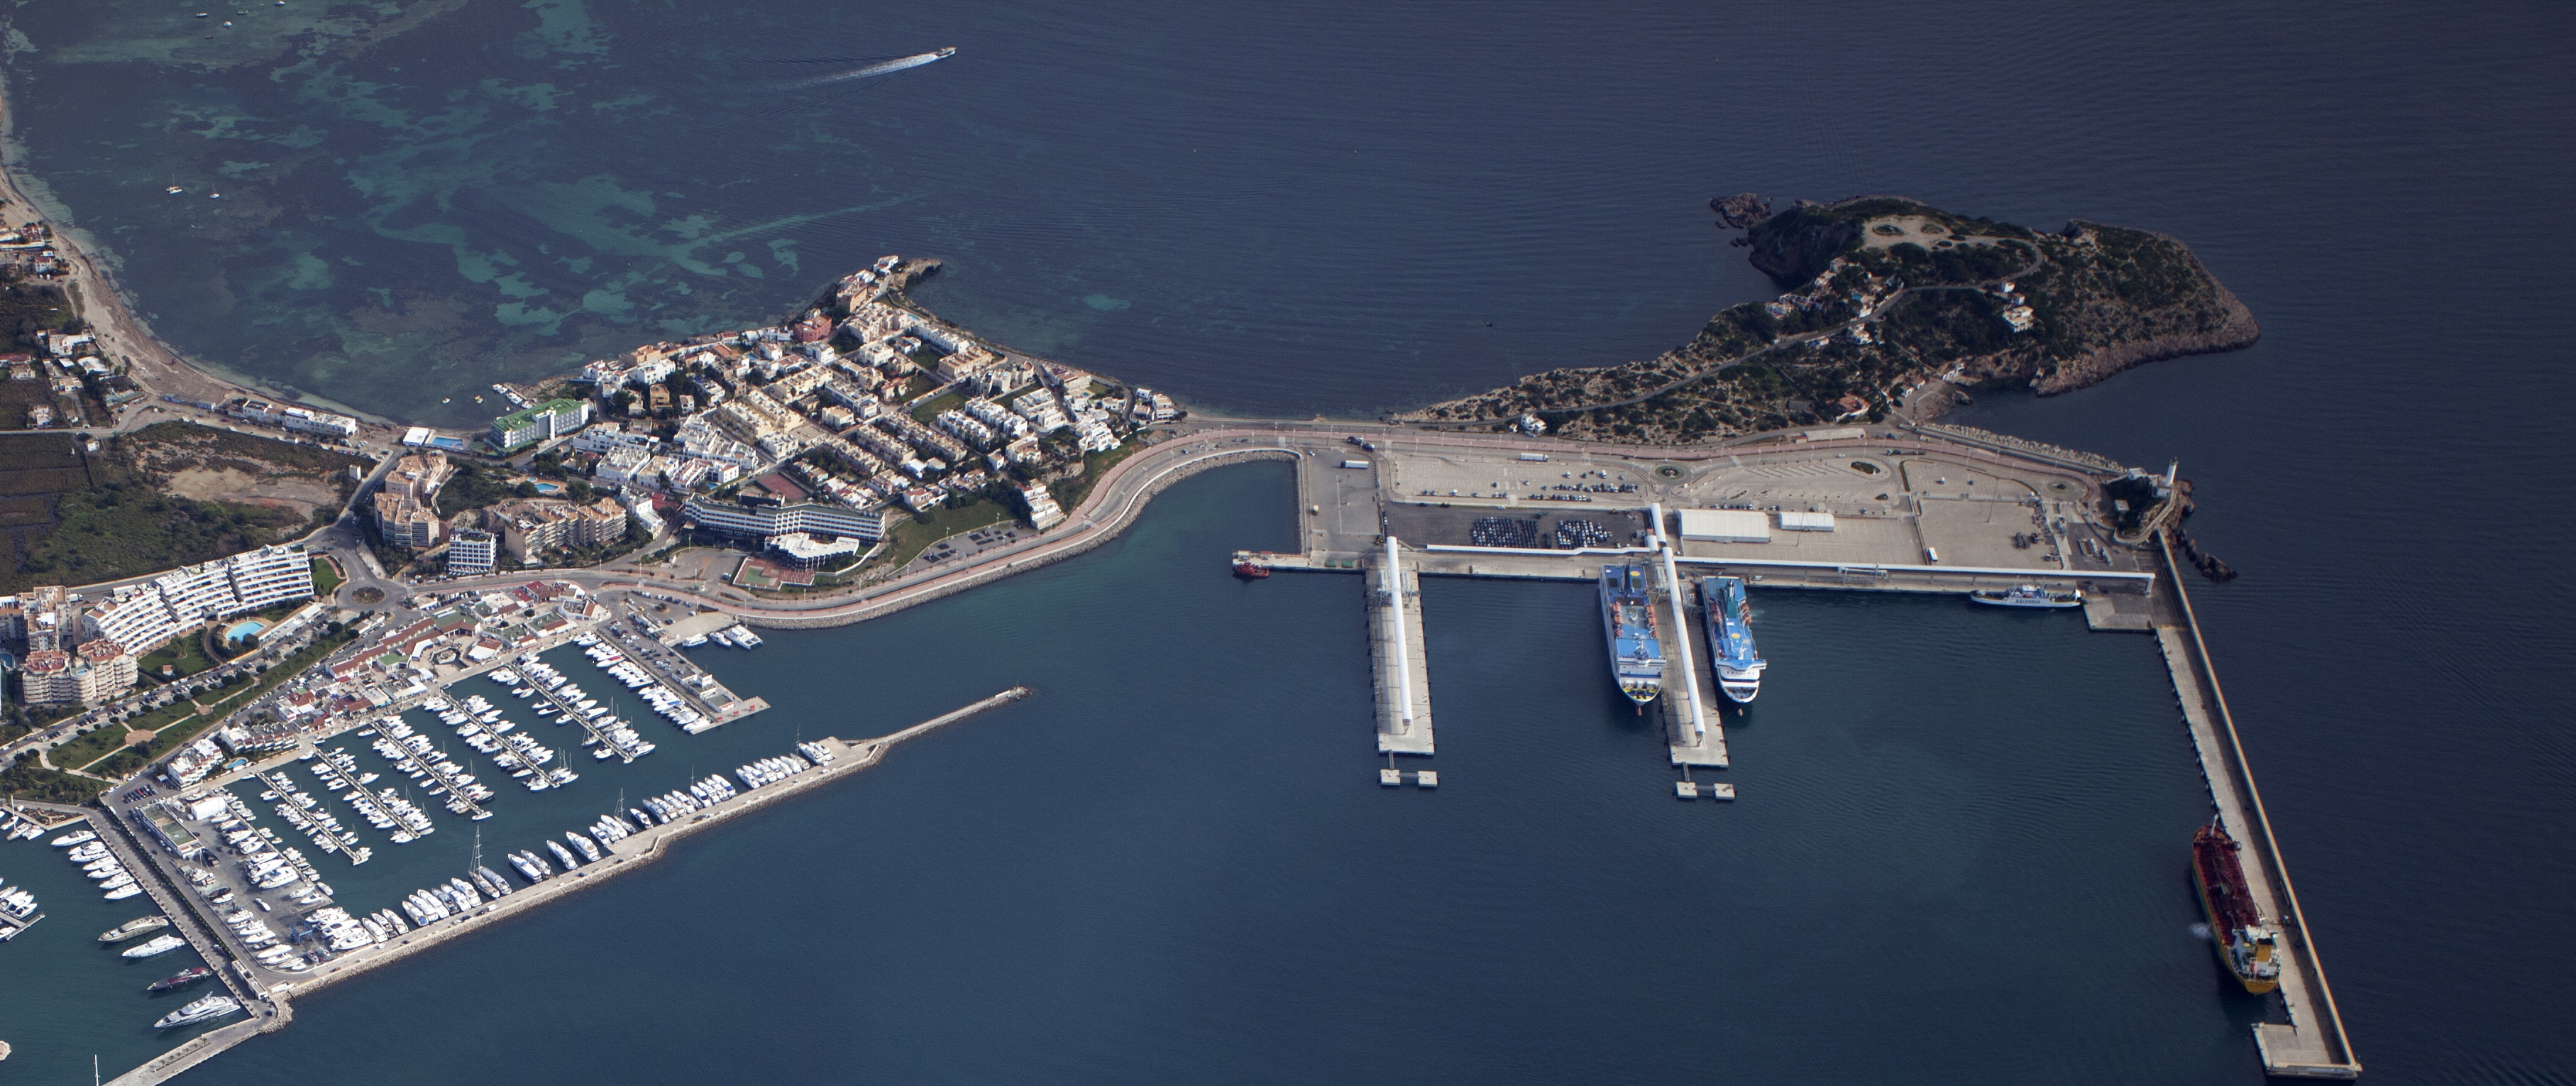 The APB denies Marina Botafoch its request to extend the term and prolong its concession at the Port of Ibiza